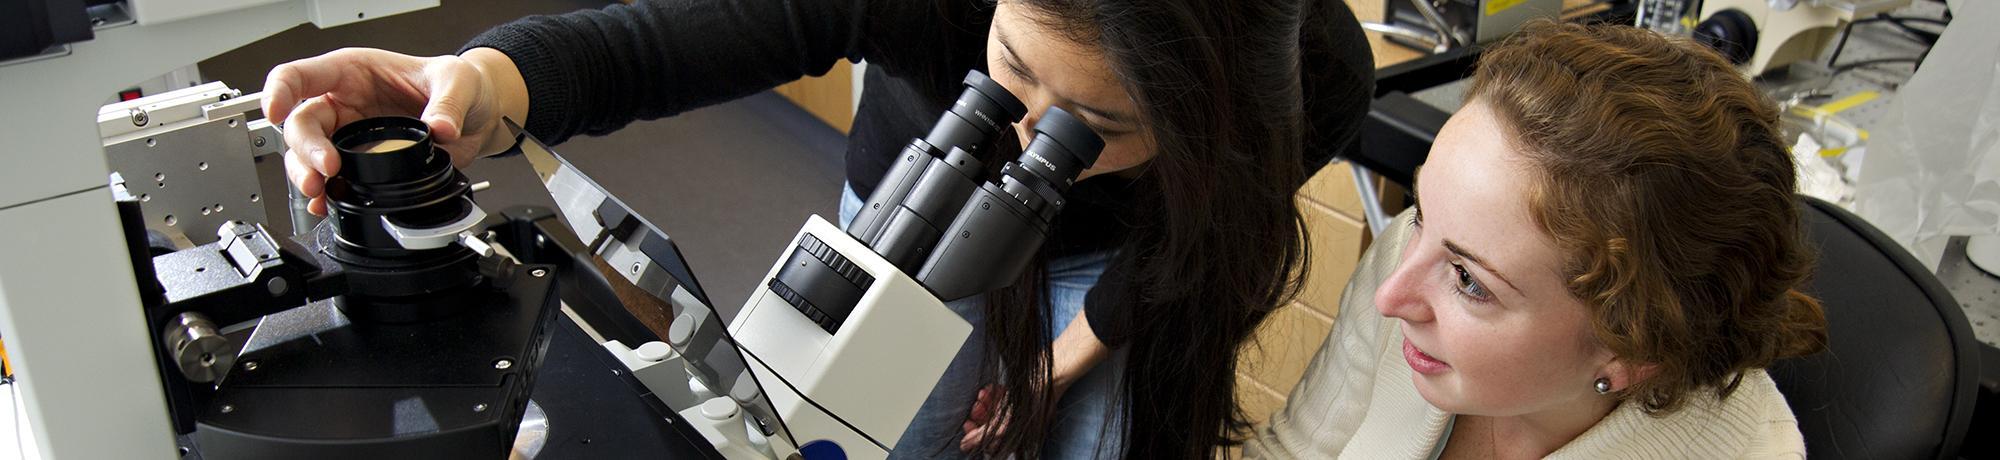 Students looking through microscope